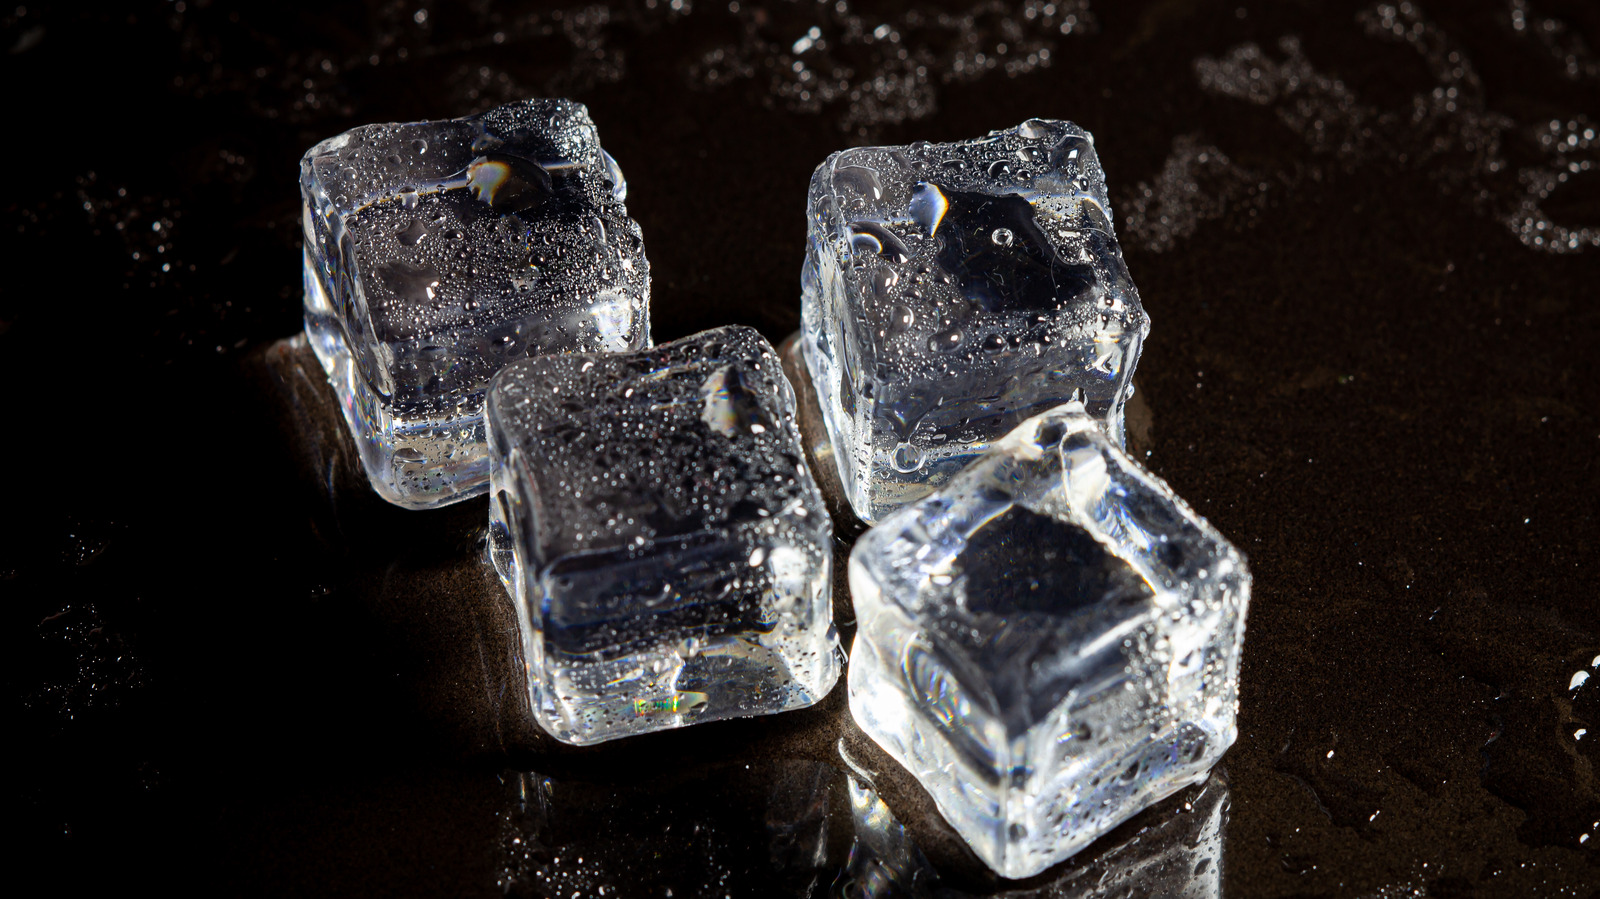 These ice makers produce perfectly, crystal-clear ice